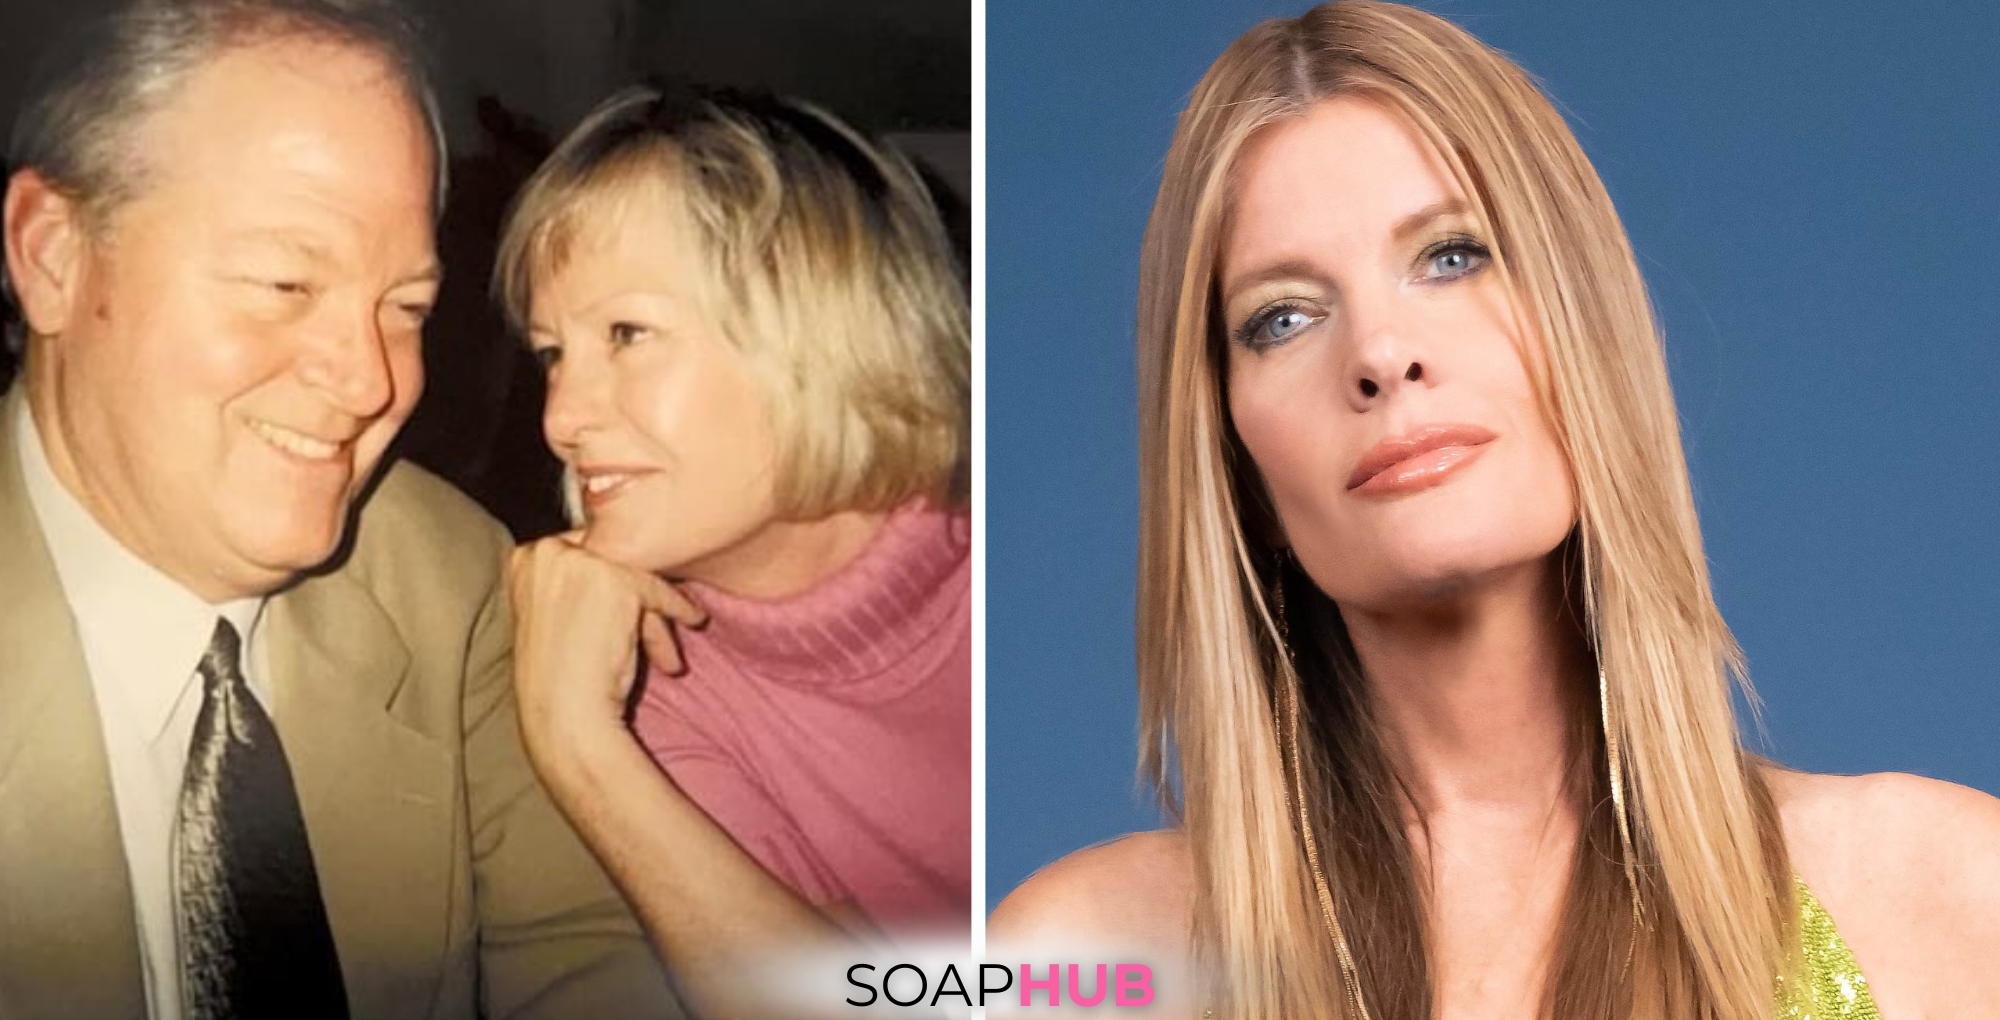 Michelle Stafford next to a photo of her mom and stepdad with the Soap Hub logo along the bottom.